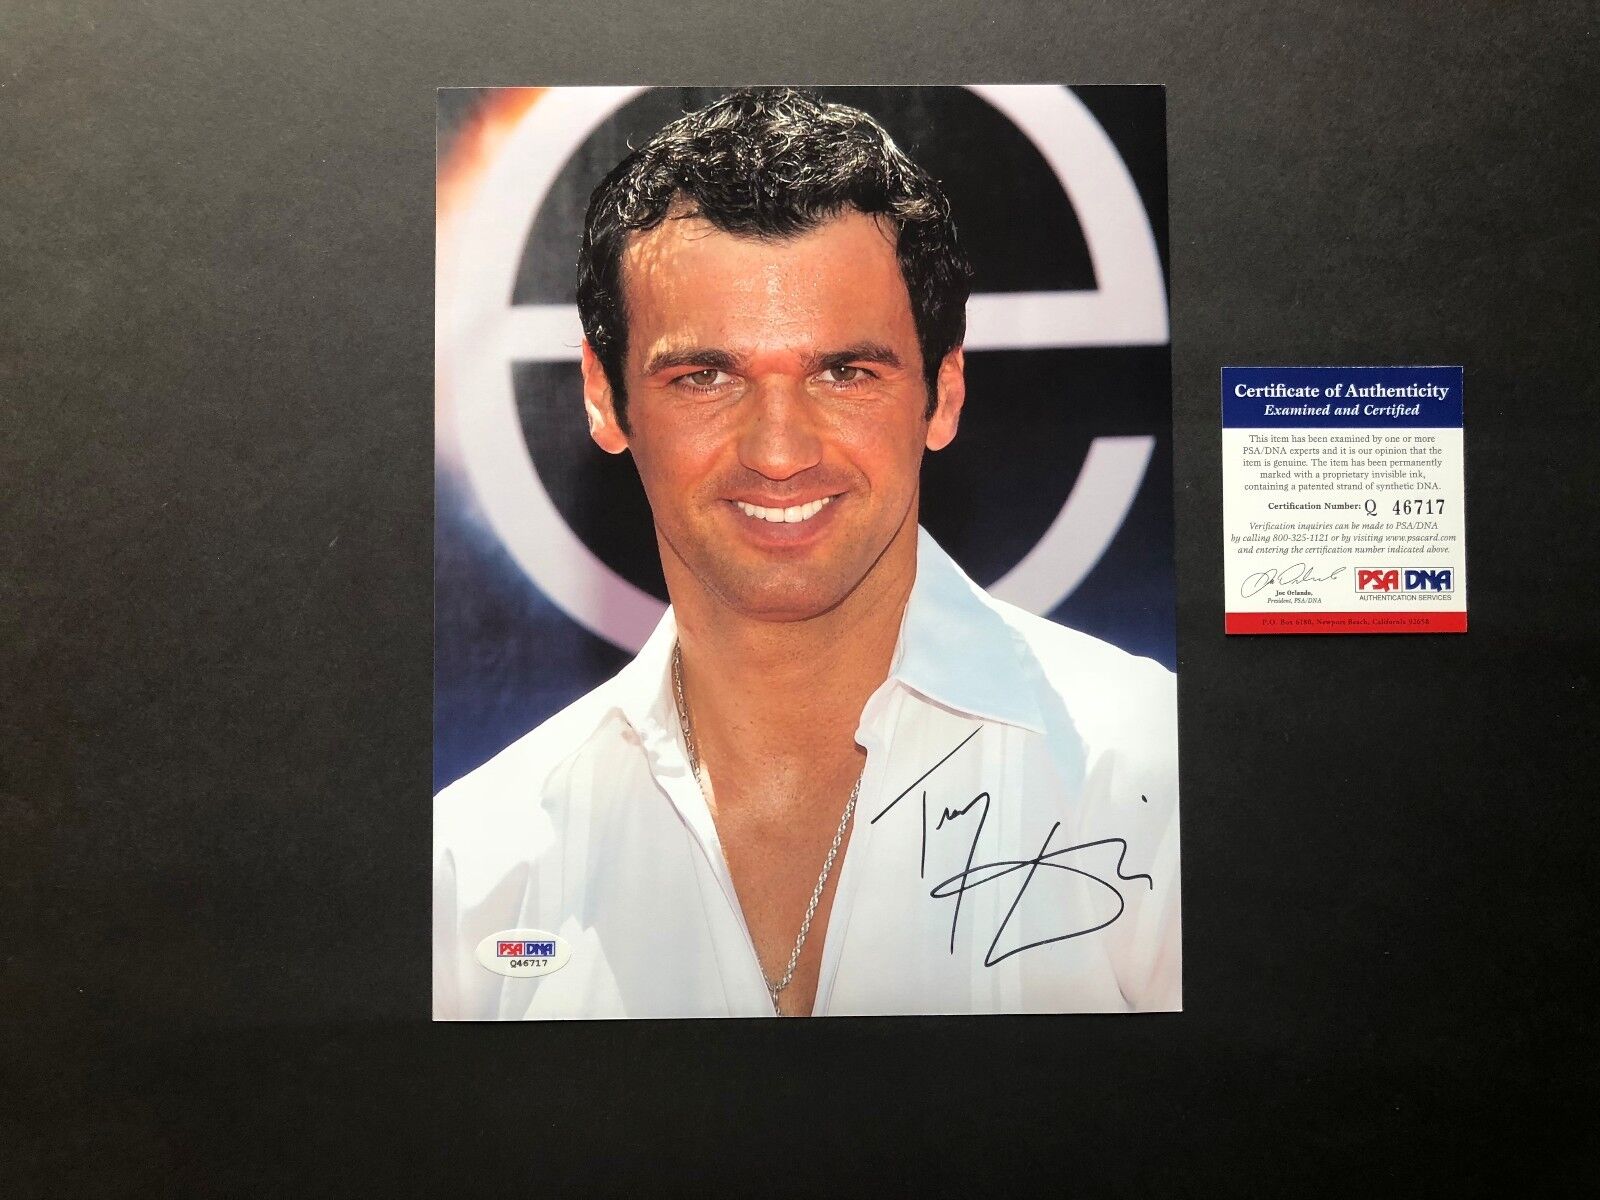 Tony Dovolani Hot! signed autographed Dancing Stars 8x10 Photo Poster painting PSA/DNA cert coa